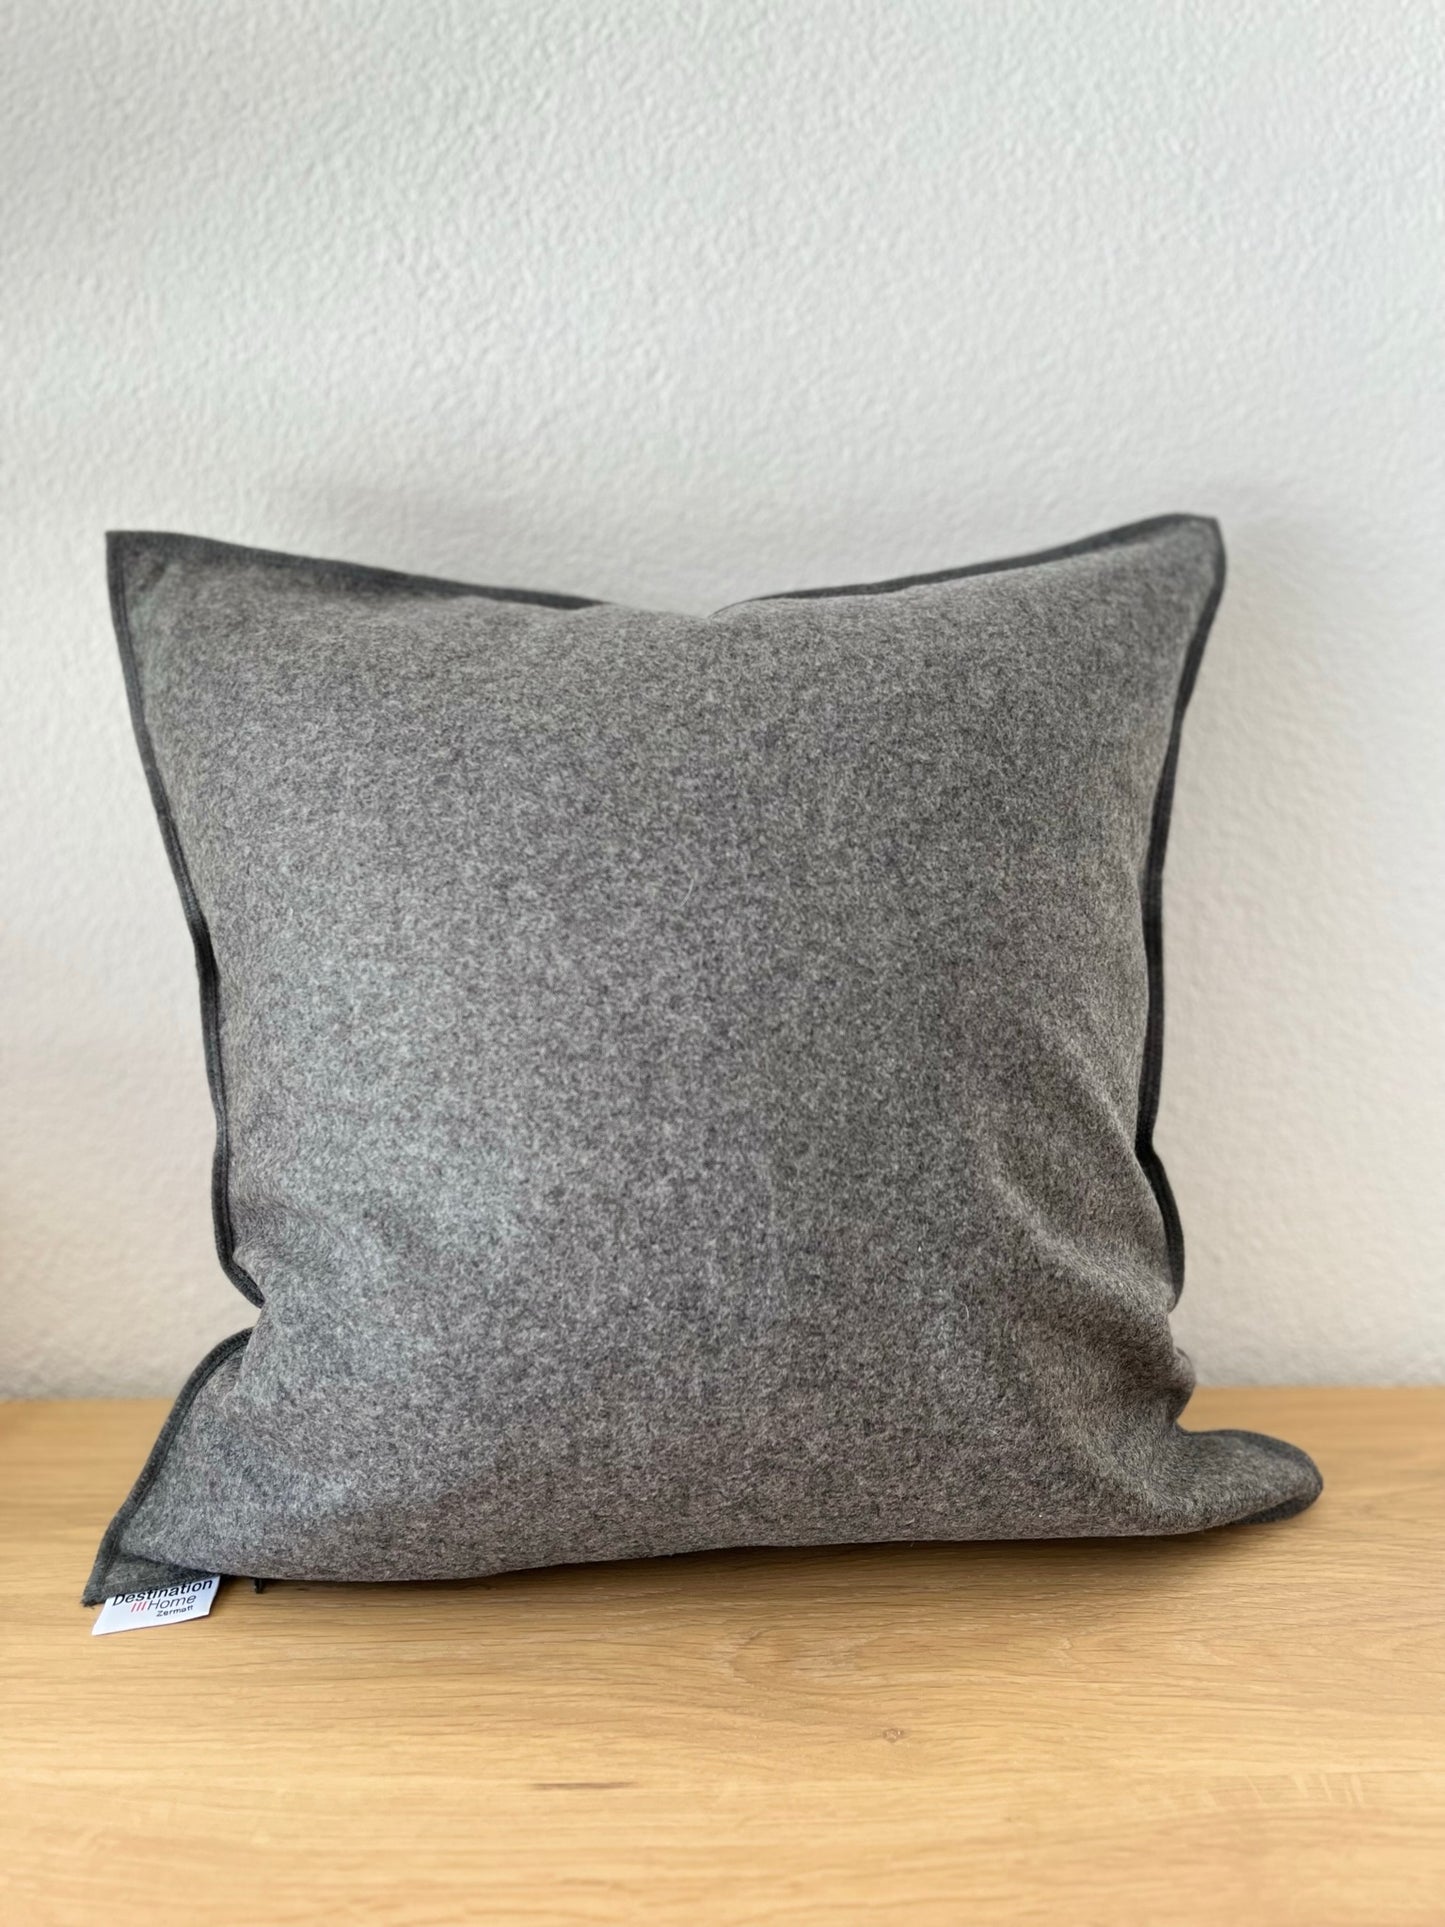 Cushion cover with handknitted details, grey